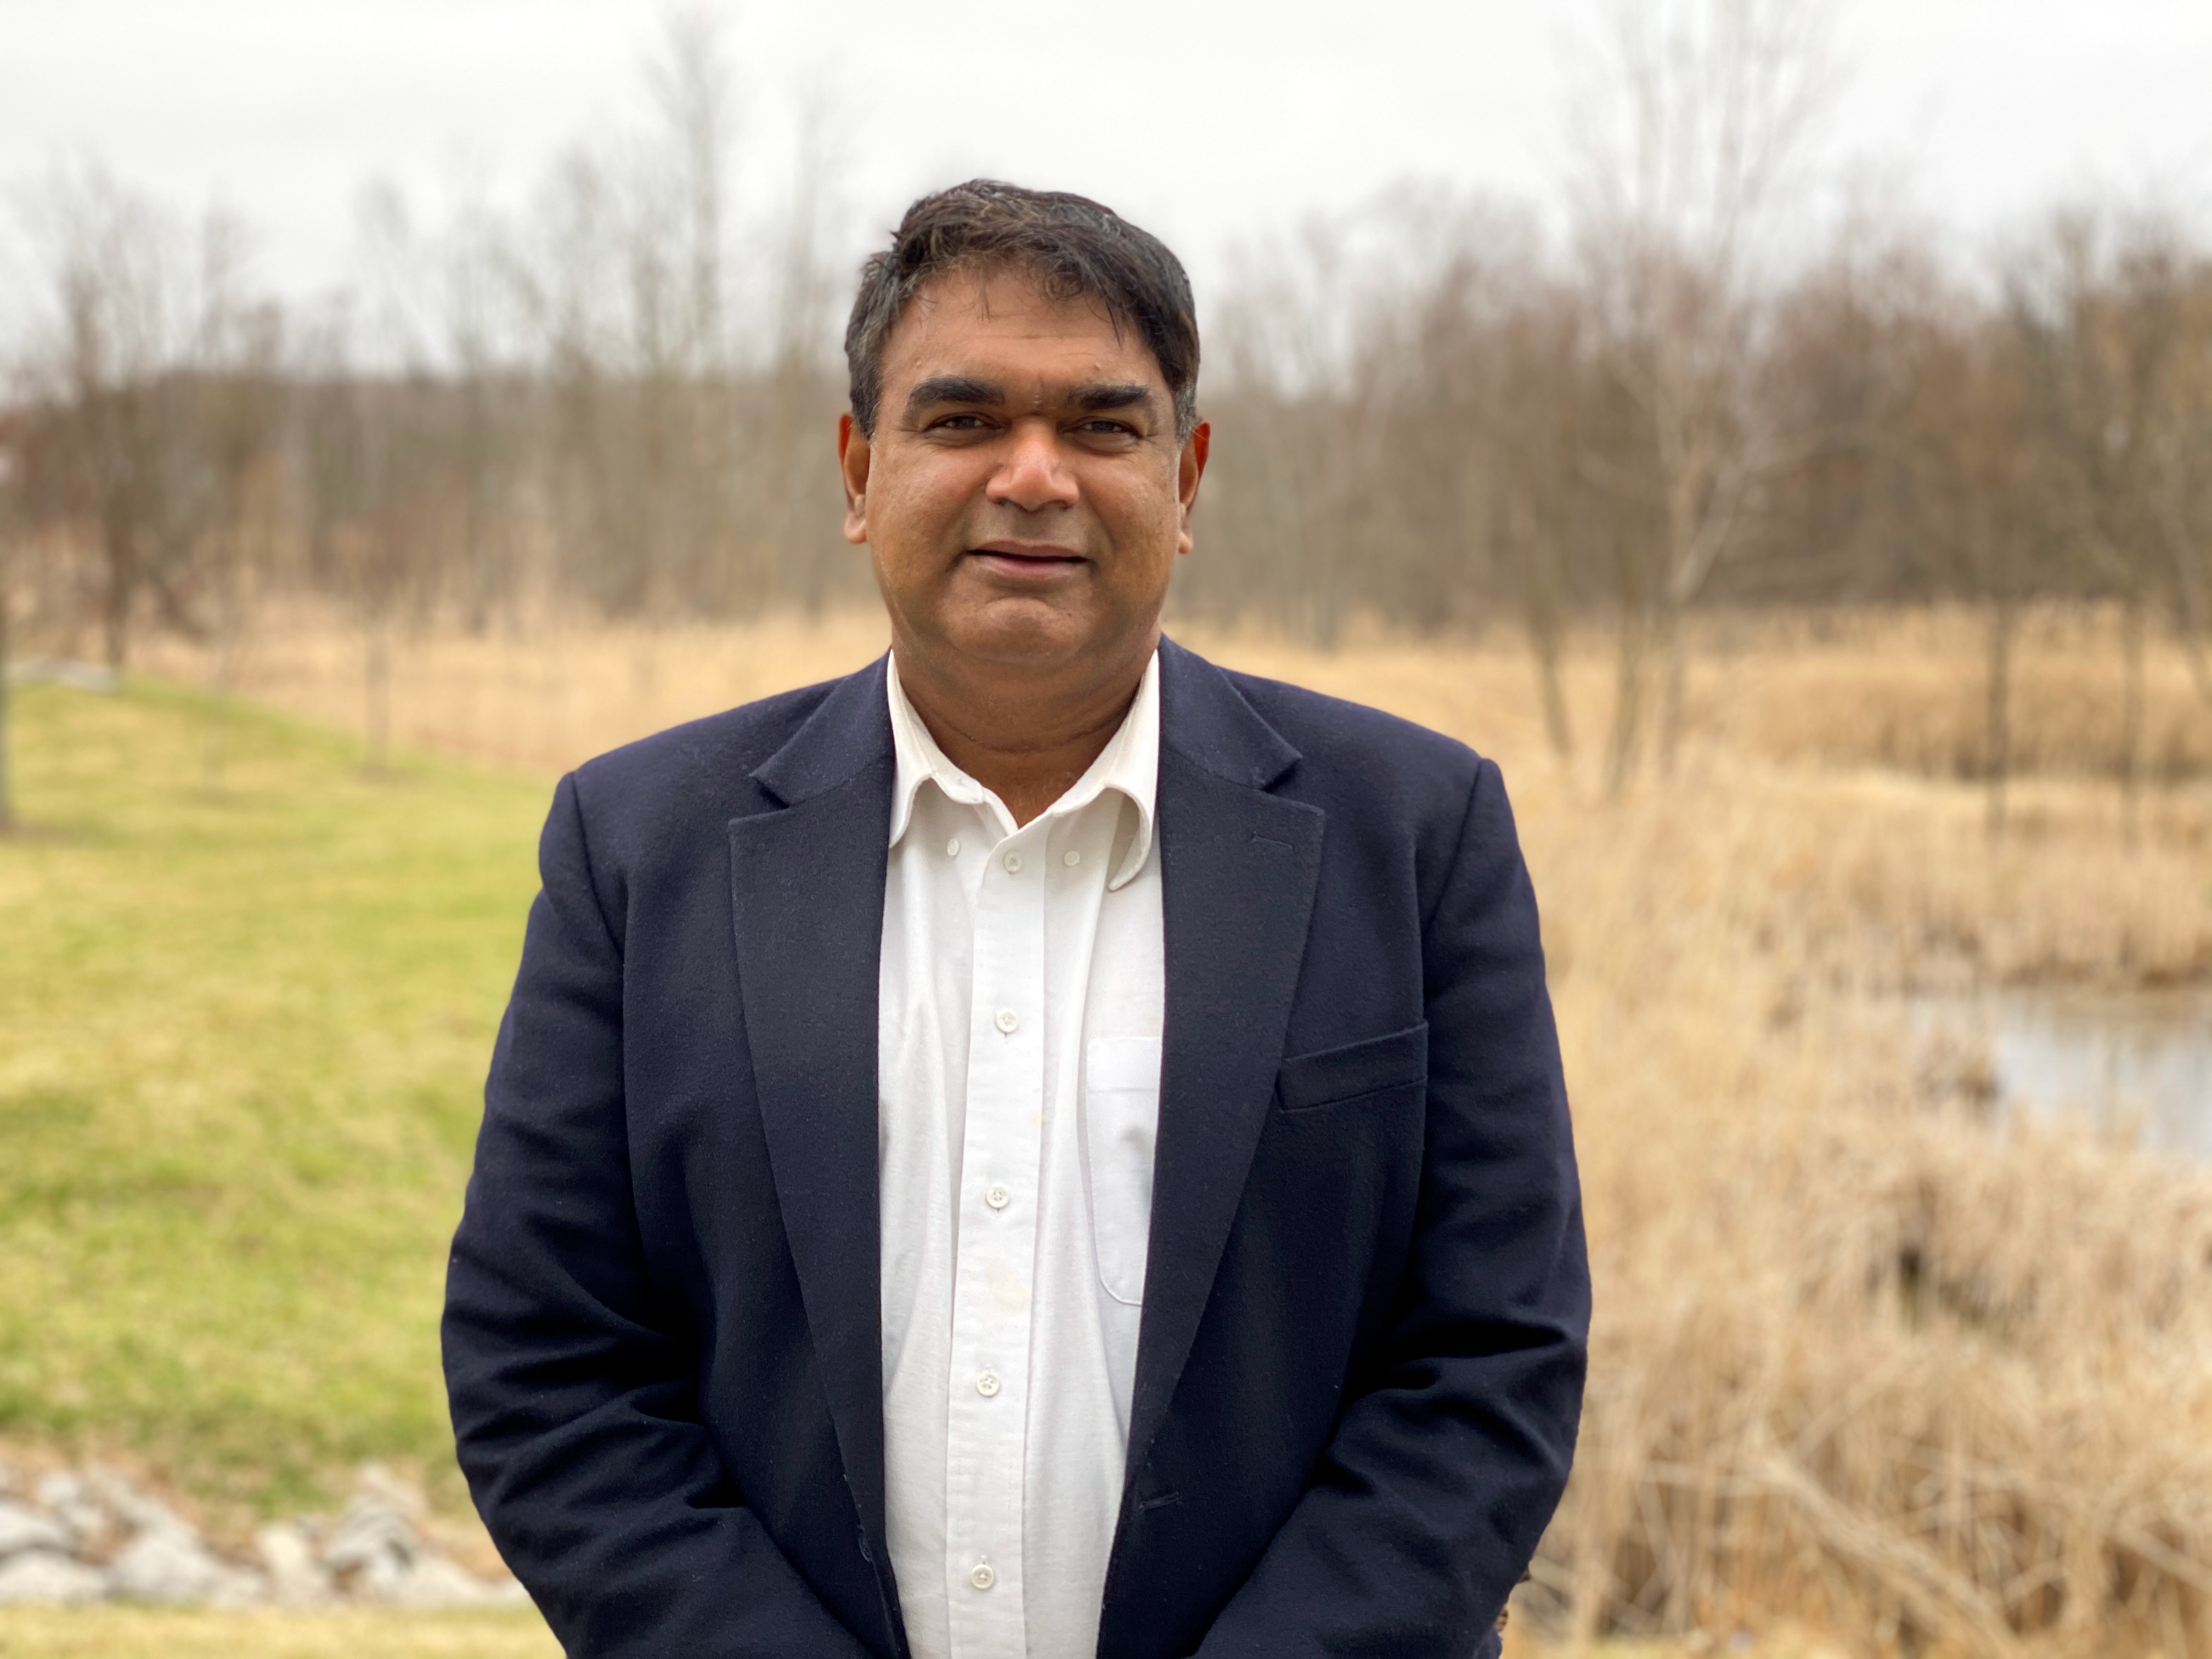 International Society of Arboriculture Honors Anand Persad, Ph.D.